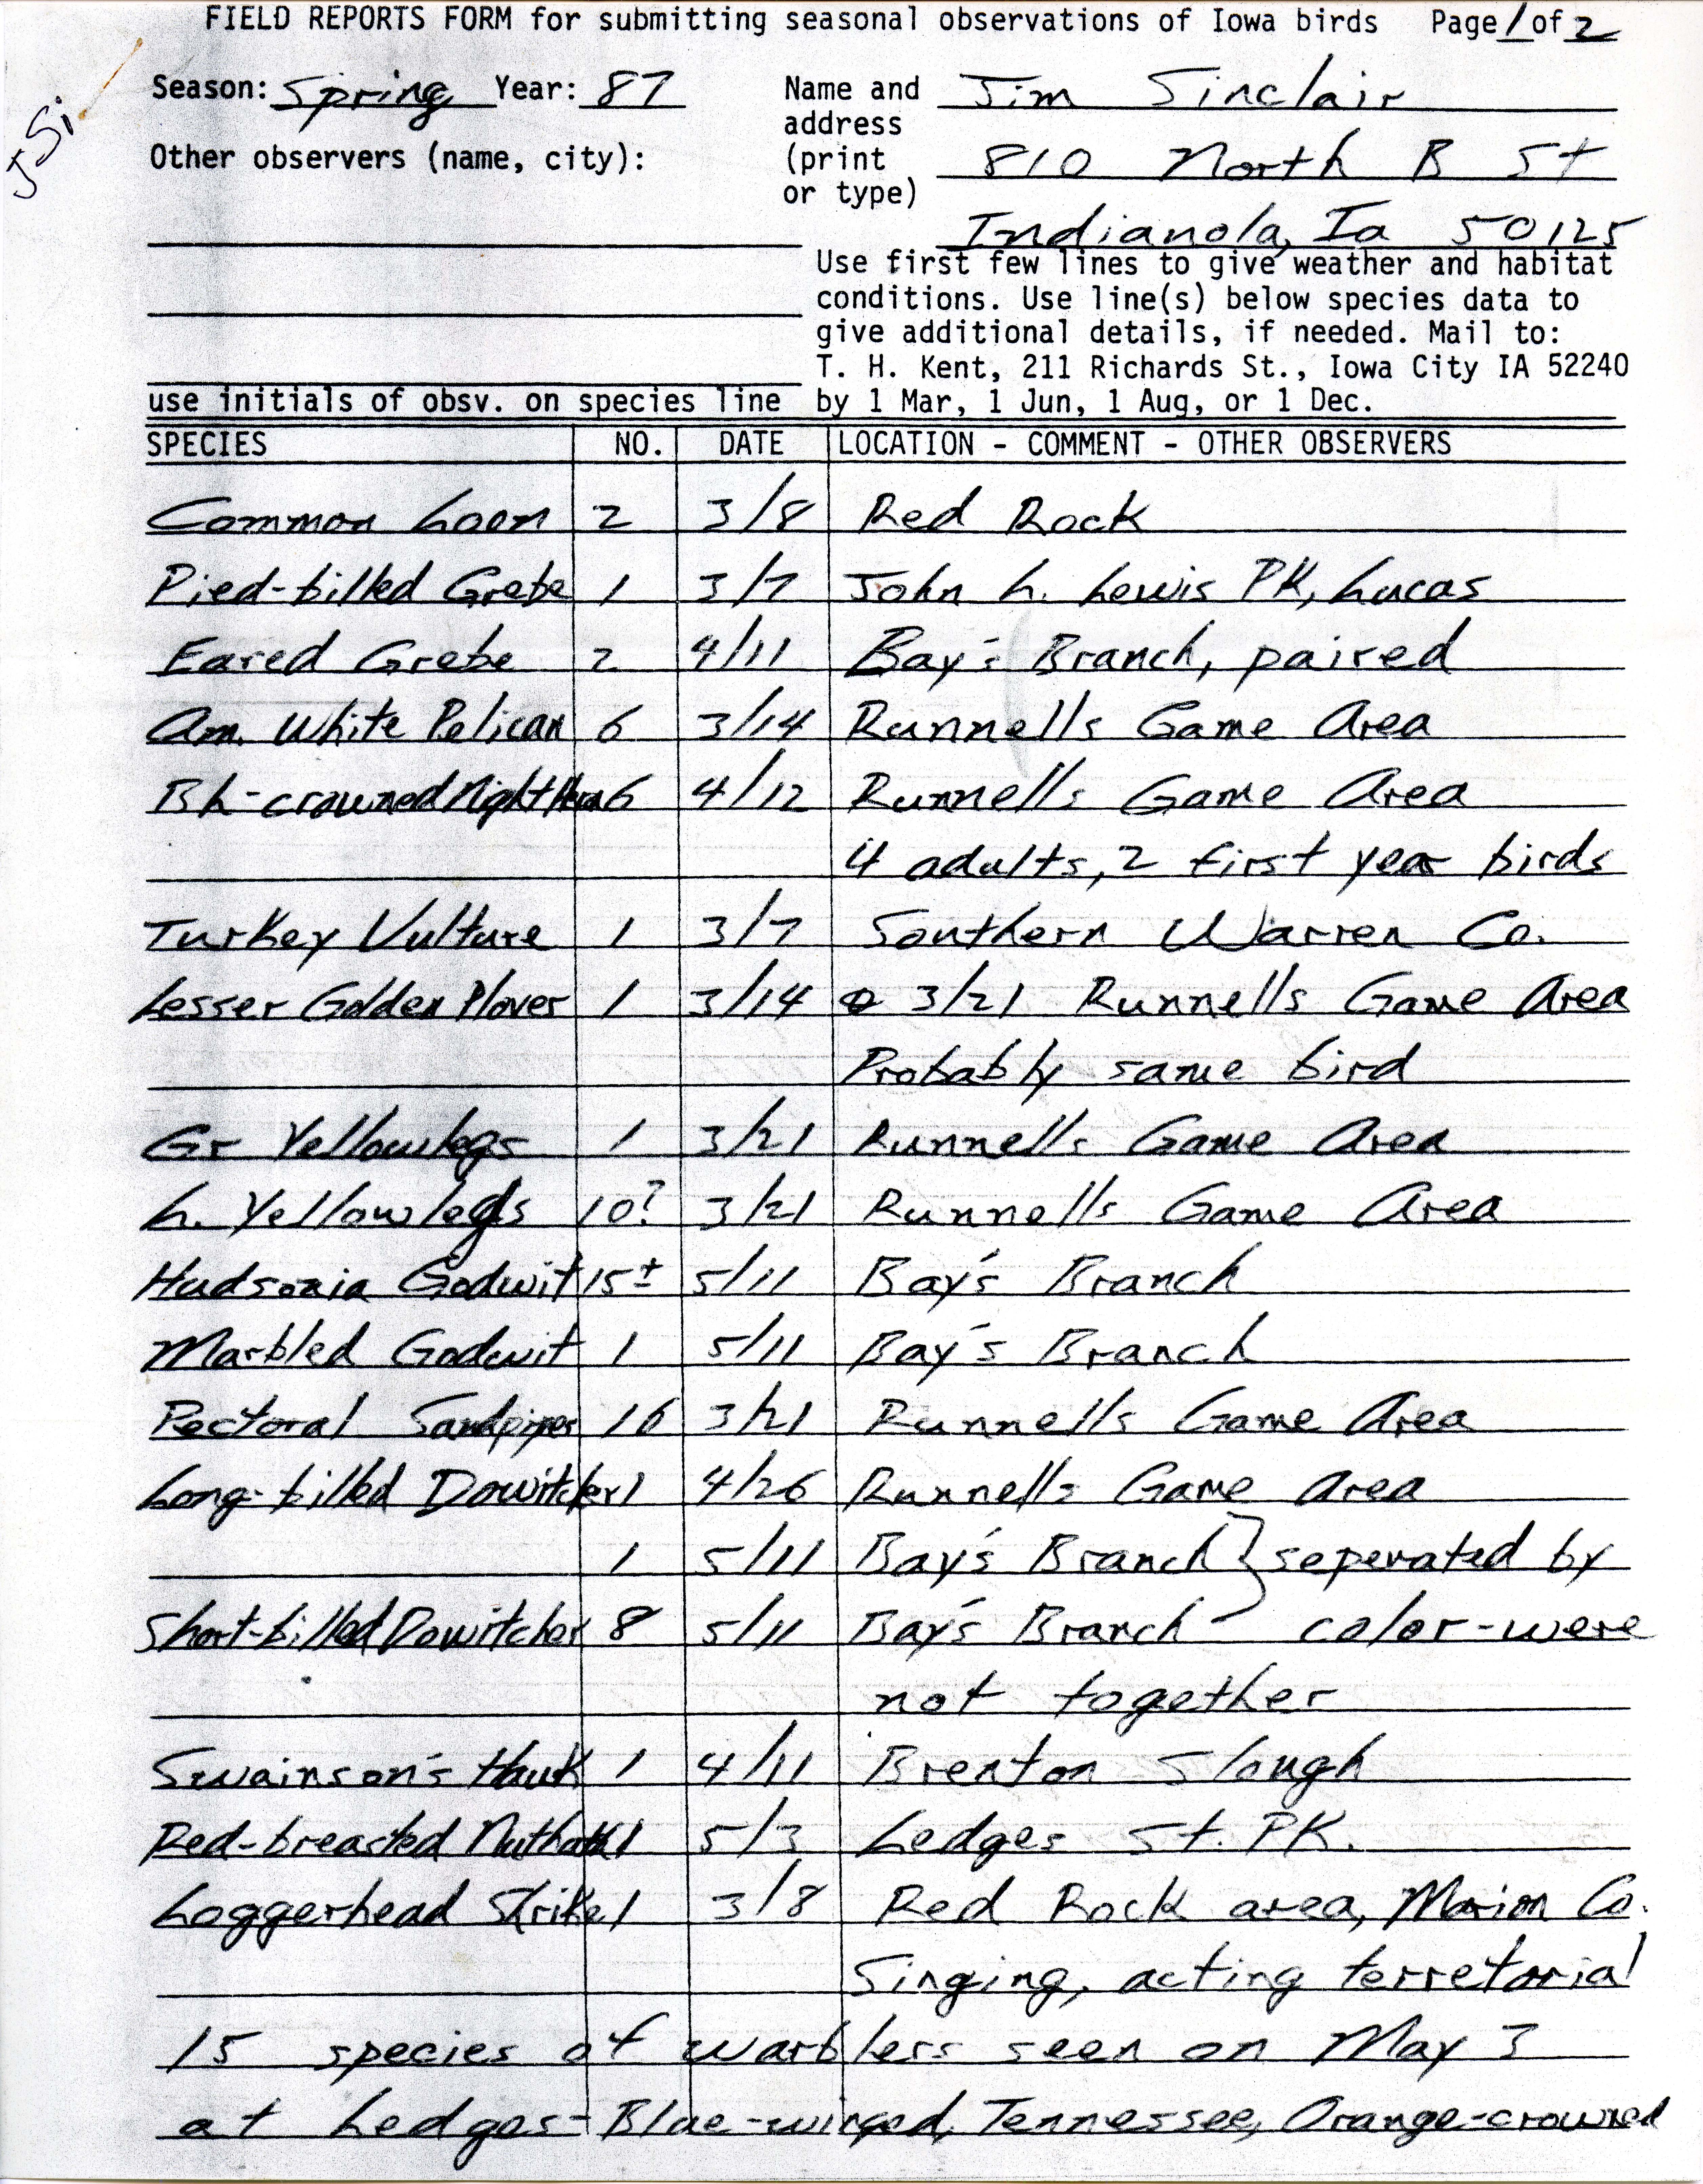 Field reports form for submitting seasonal observations of Iowa birds, Jim Sinclair, spring 1987